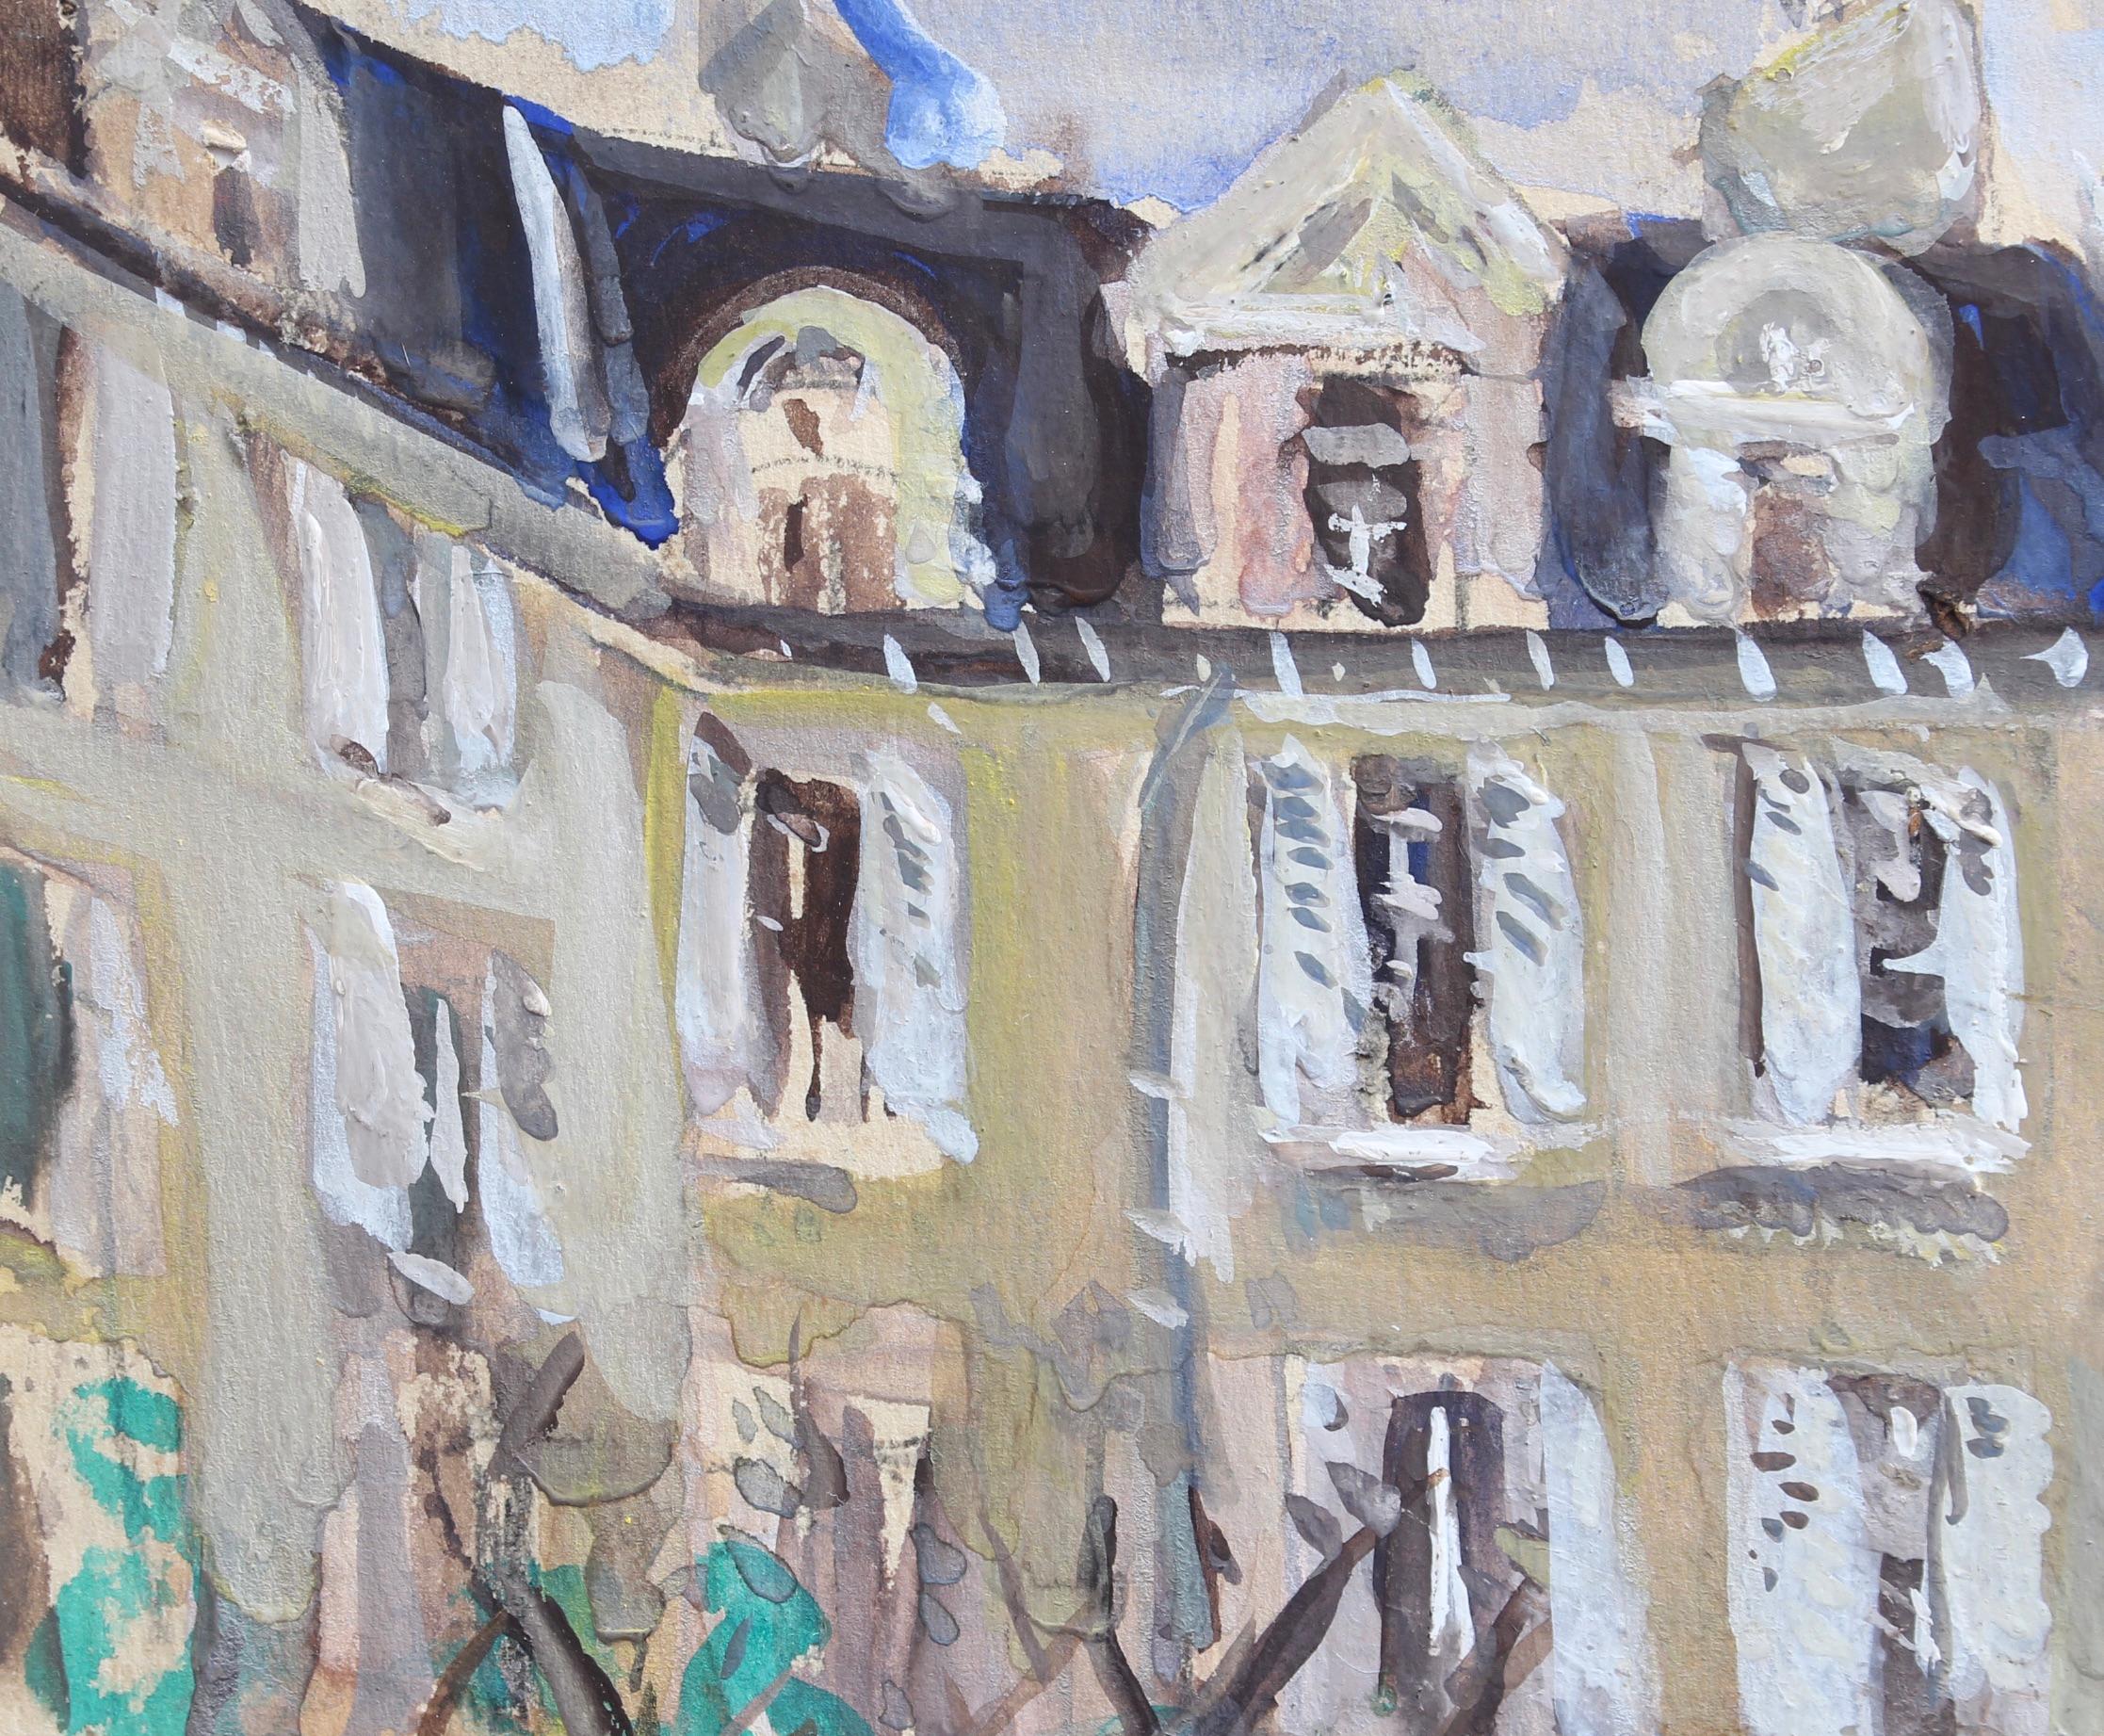 'A View of Paris', gouache on paper, by Lucien Génin (circa 1930s). Génin was most noted for his paintings of Paris in the 1920s and 30s. Some were very animated showing Parisians meandering by some of the city's well known landmarks. In this case